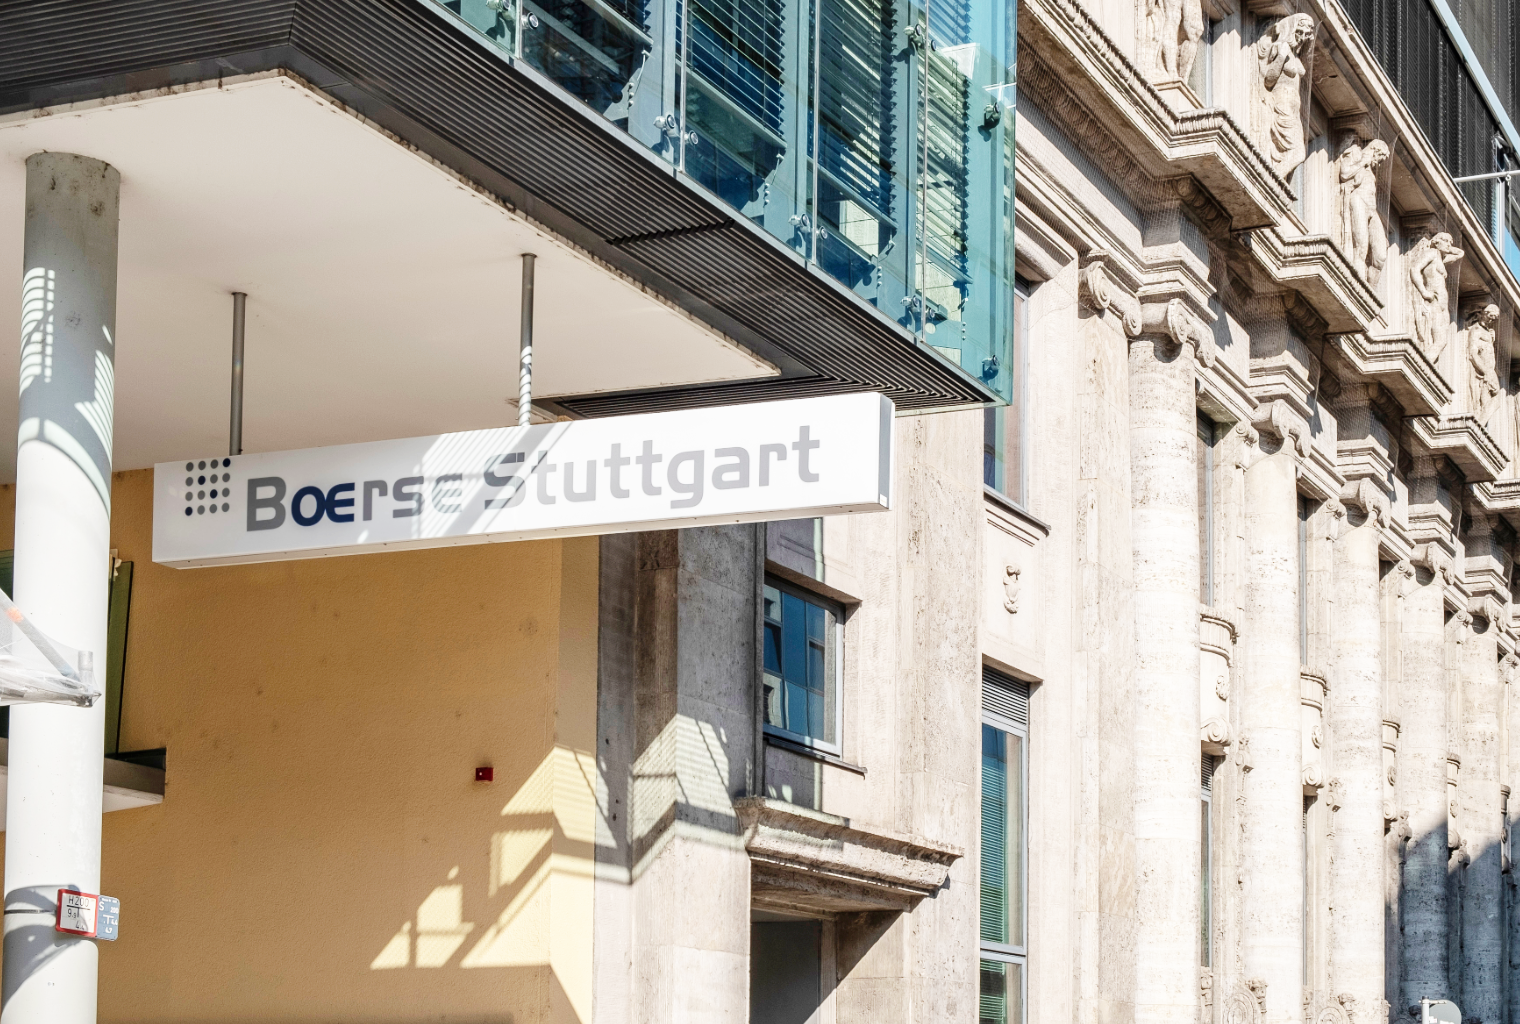 Major German Stock Exchange Group Launches Crypto Trading